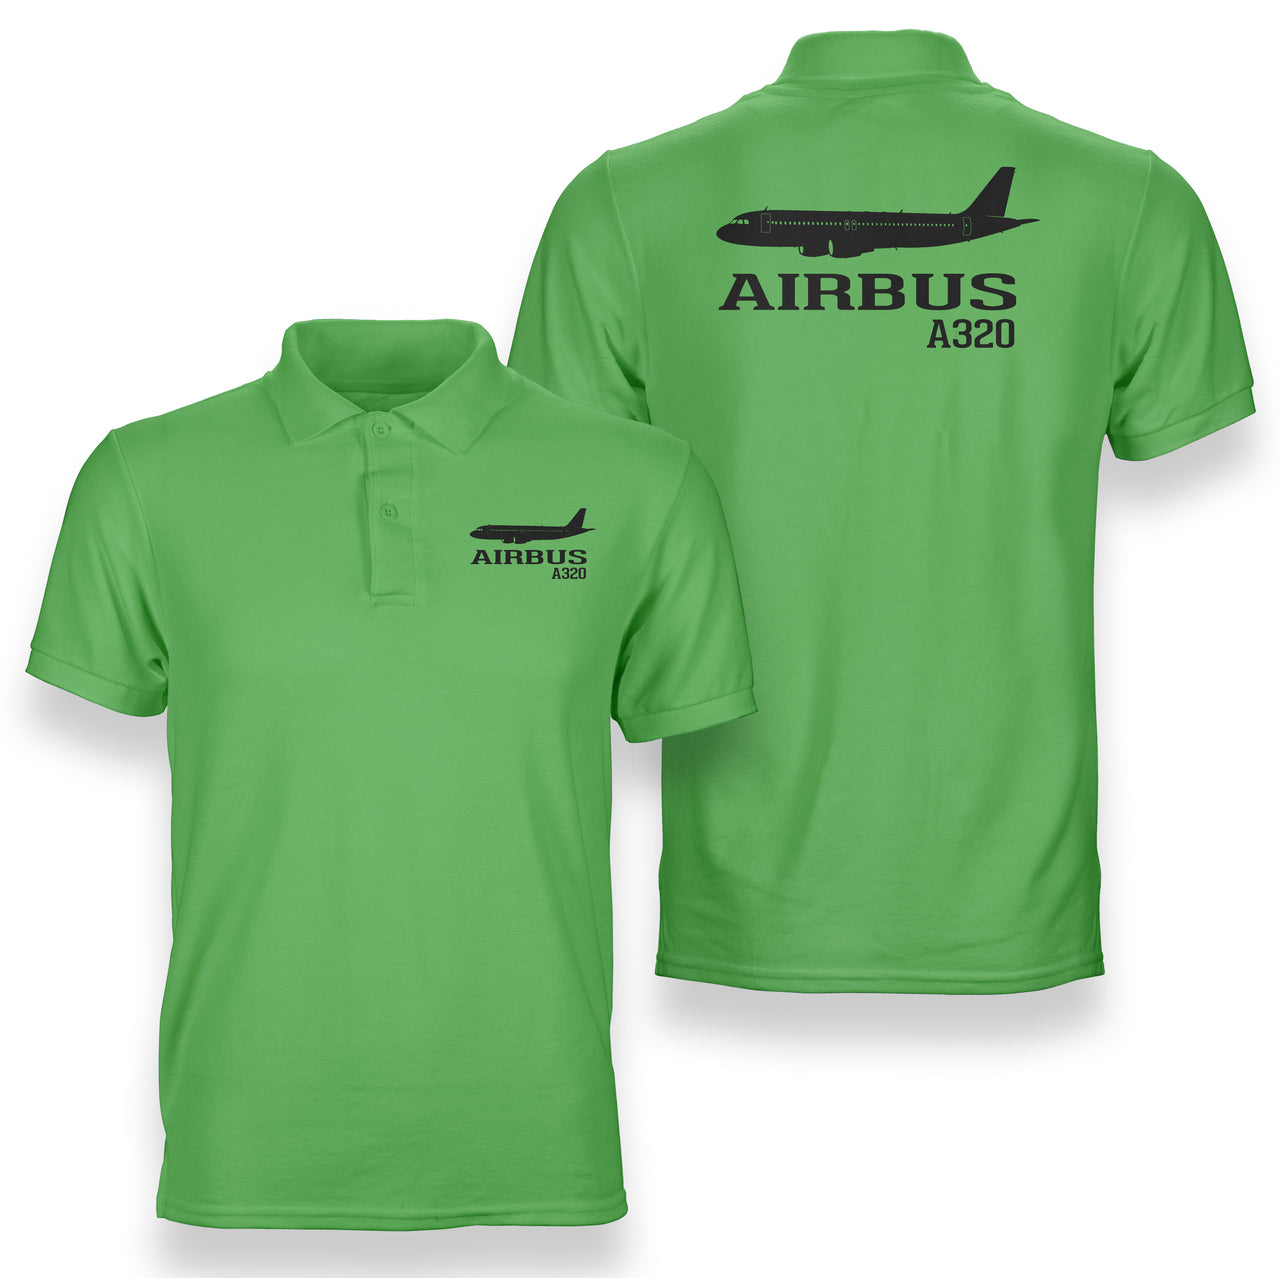 Airbus A320 Printed & Designed Double Side Polo T-Shirts